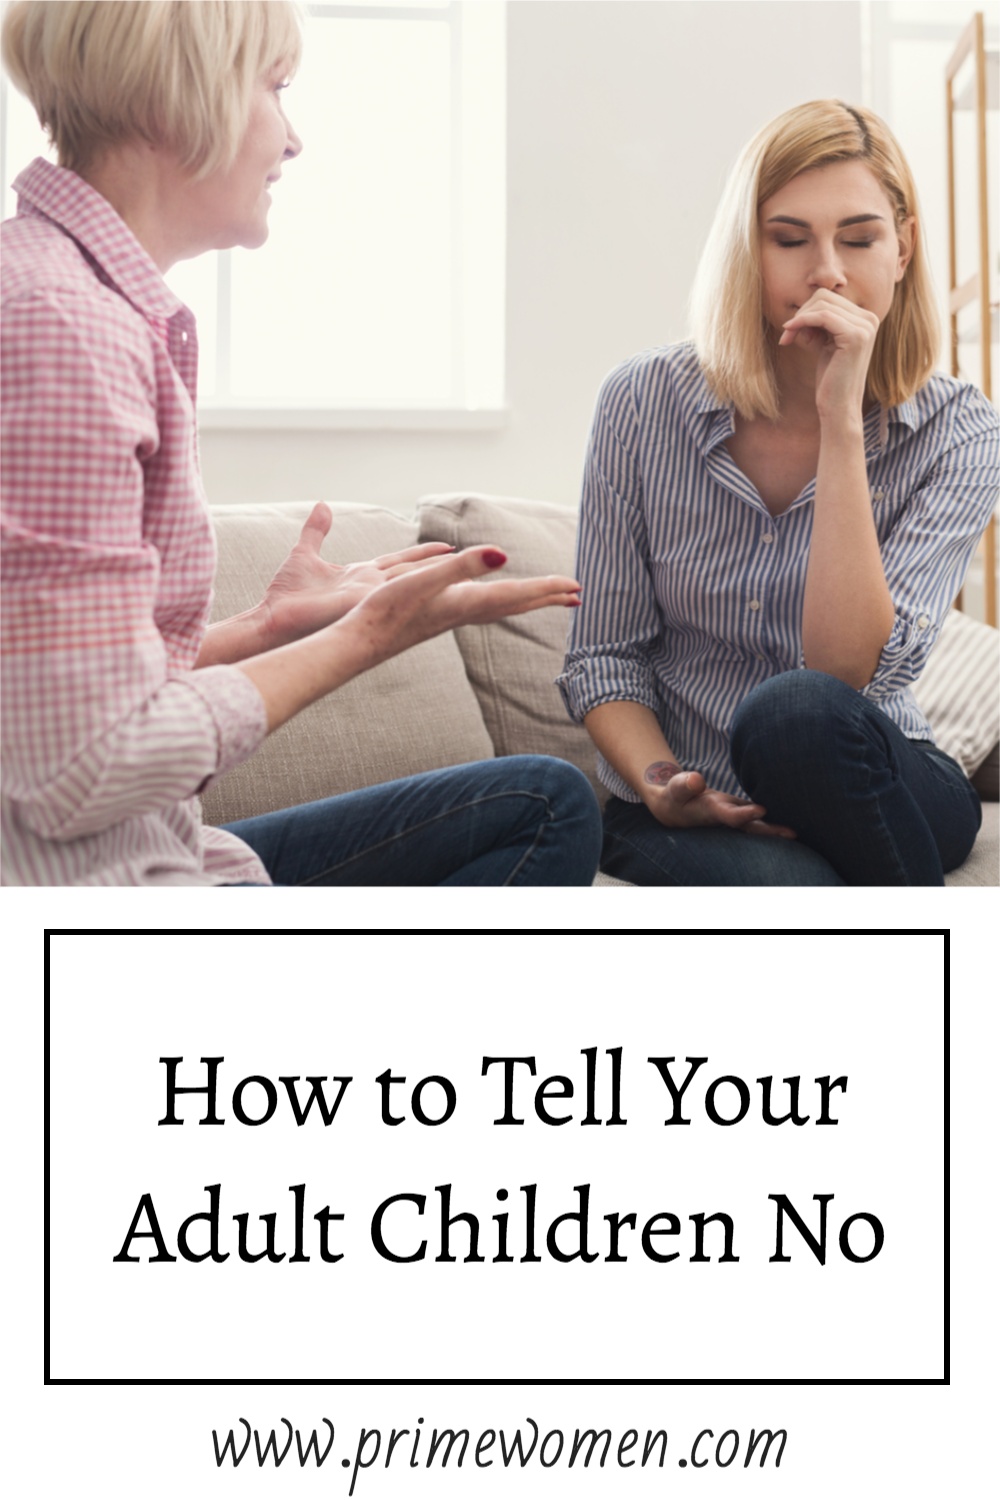 How to Tell Your Adult Children No